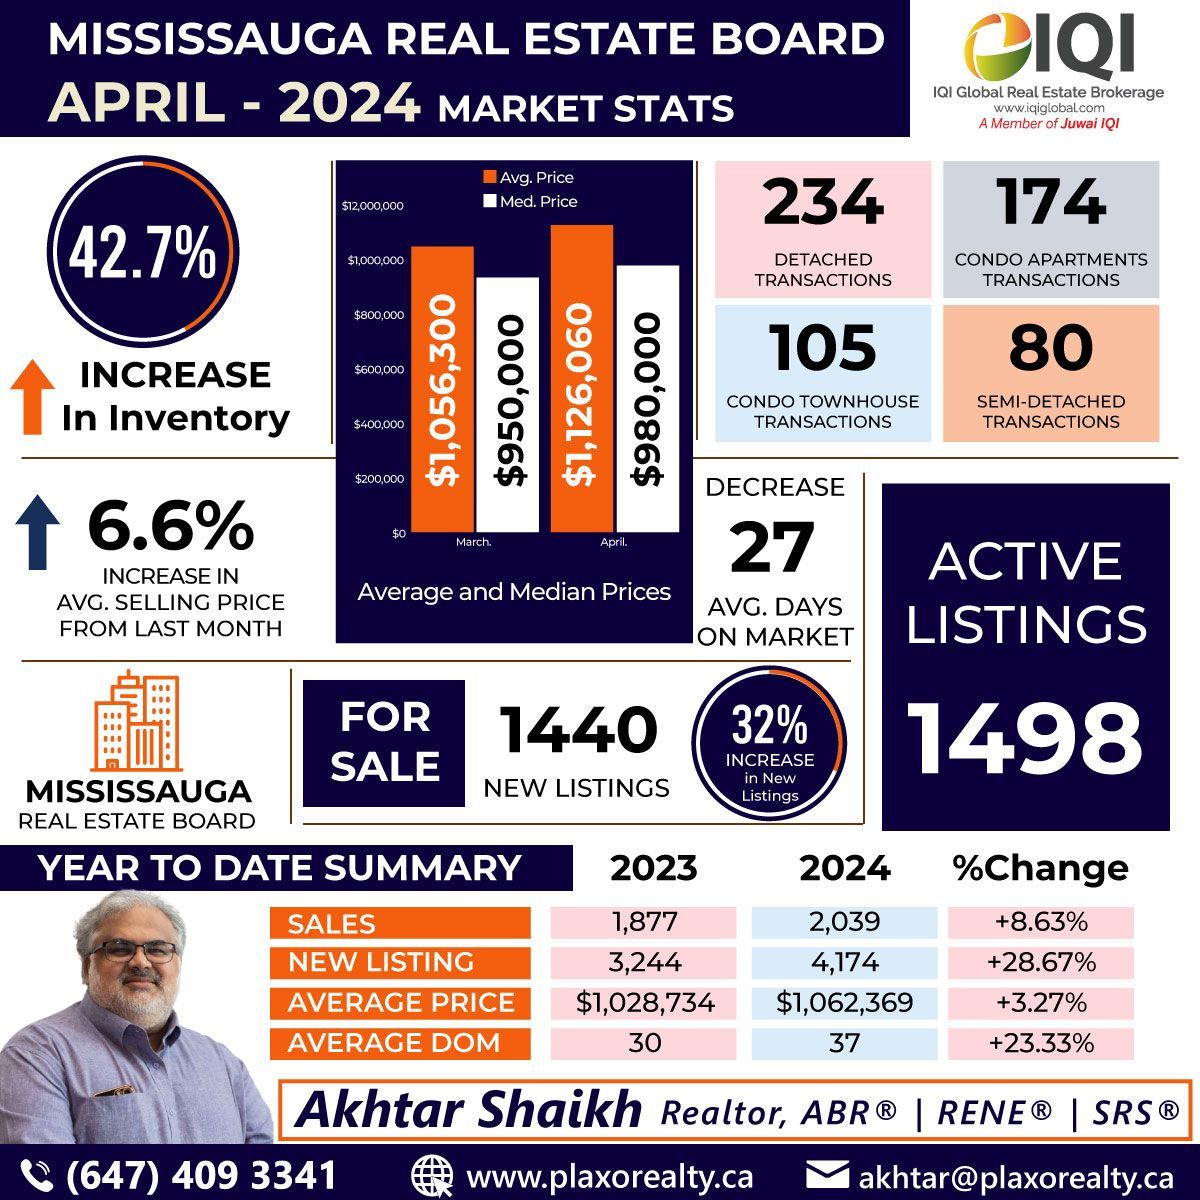 📈 Check out the Real Estate Market Snapshot!
..
⭐⭐⭐⭐⭐ 𝗔𝗞𝗛𝗧𝗔𝗥 𝗦𝗛𝗔𝗜𝗞𝗛
📞 +1 647-409-3341 | Akhtar@PlaxoRealty.ca
.
#akhtariqi #akhtarshaikh #firsttimehomebuyer #newhomeowner
#mississaugarealty #mississaugamarket #mississaugarealestate